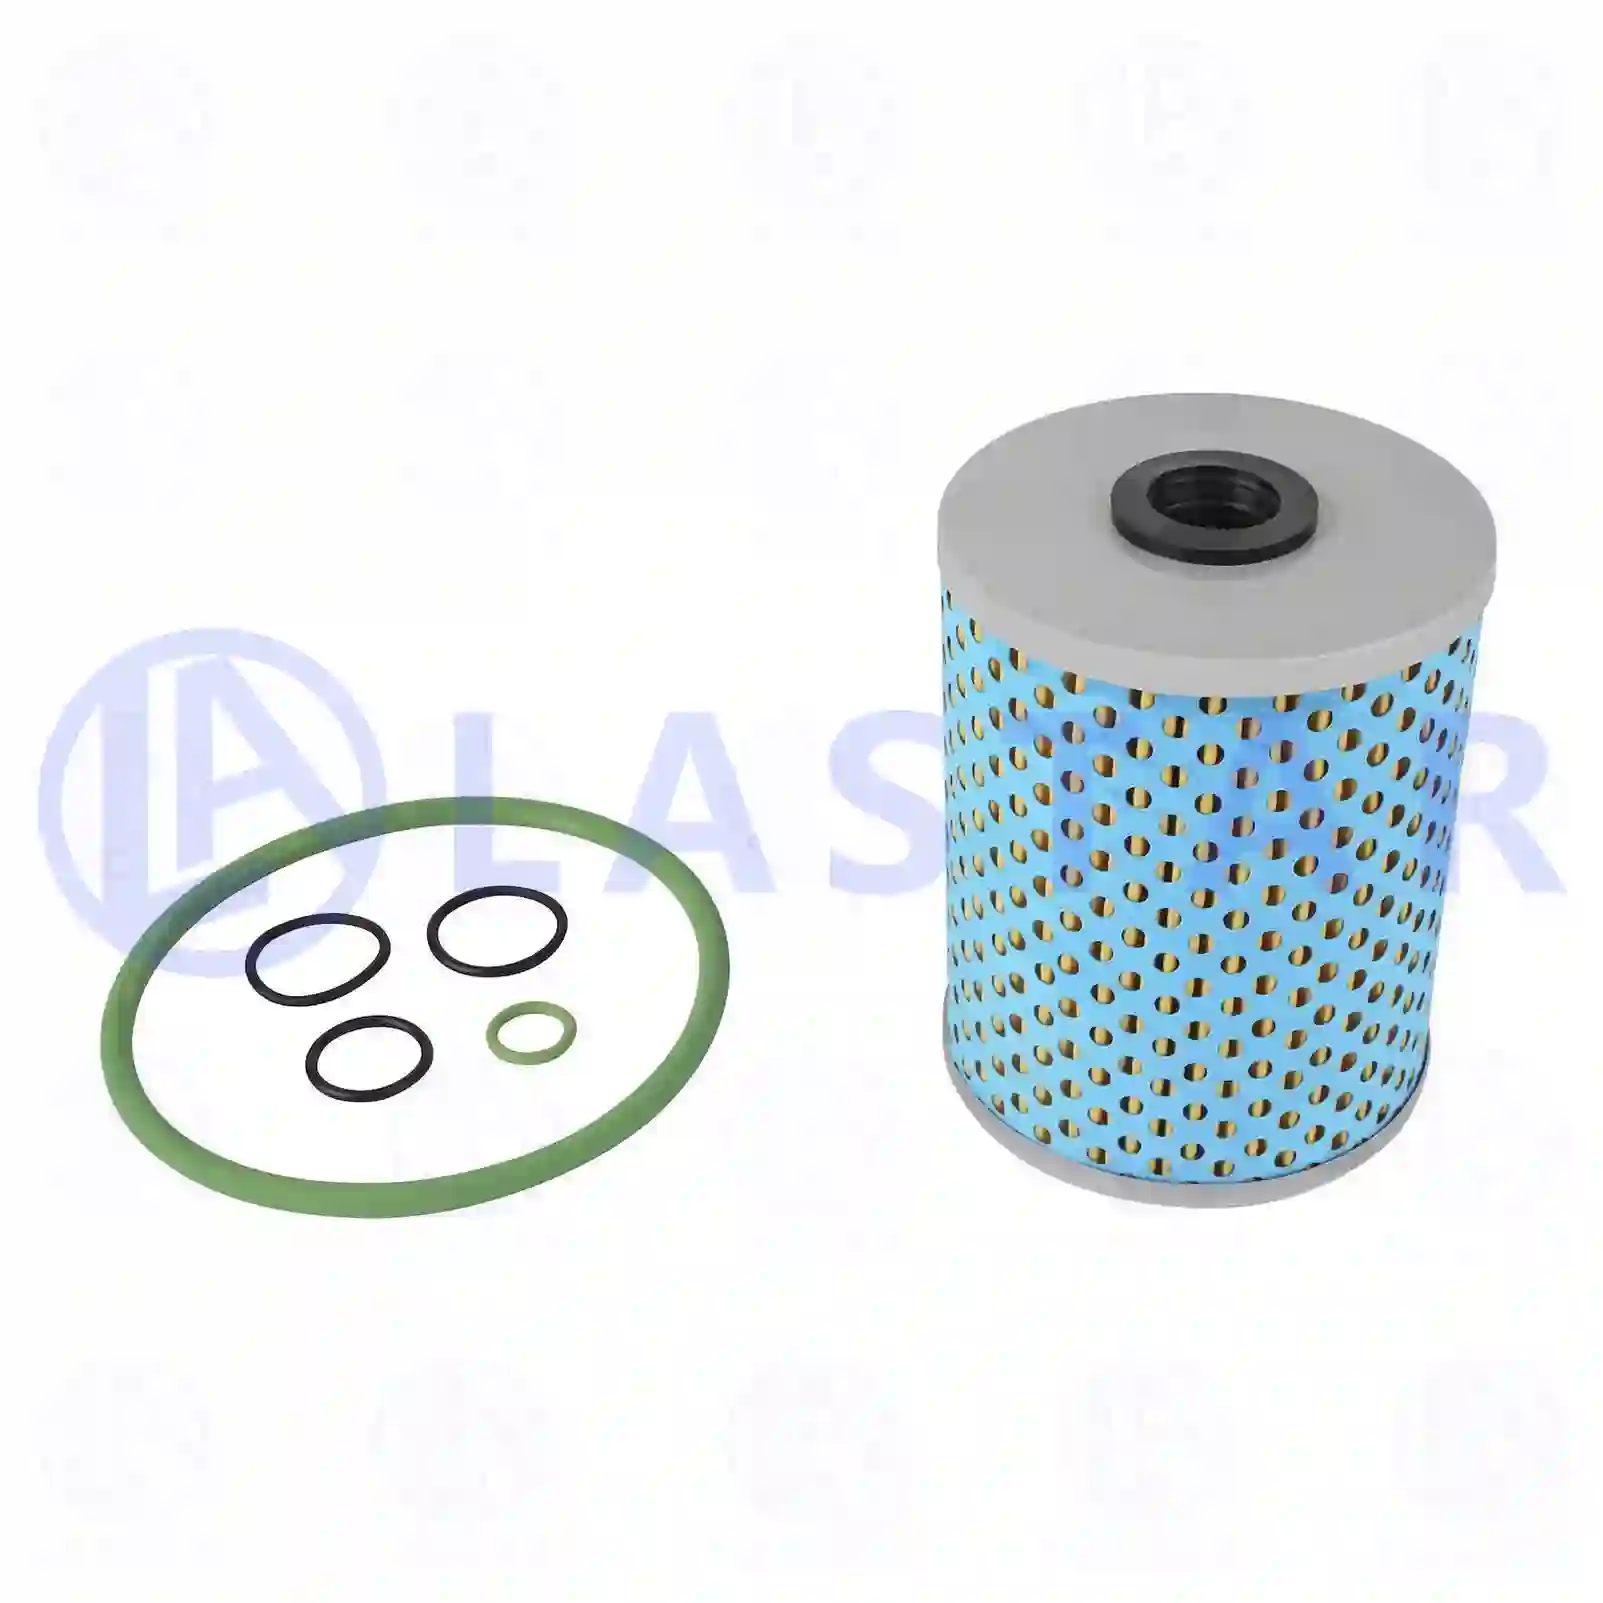  Oil filter, retarder, with seal rings || Lastar Spare Part | Truck Spare Parts, Auotomotive Spare Parts